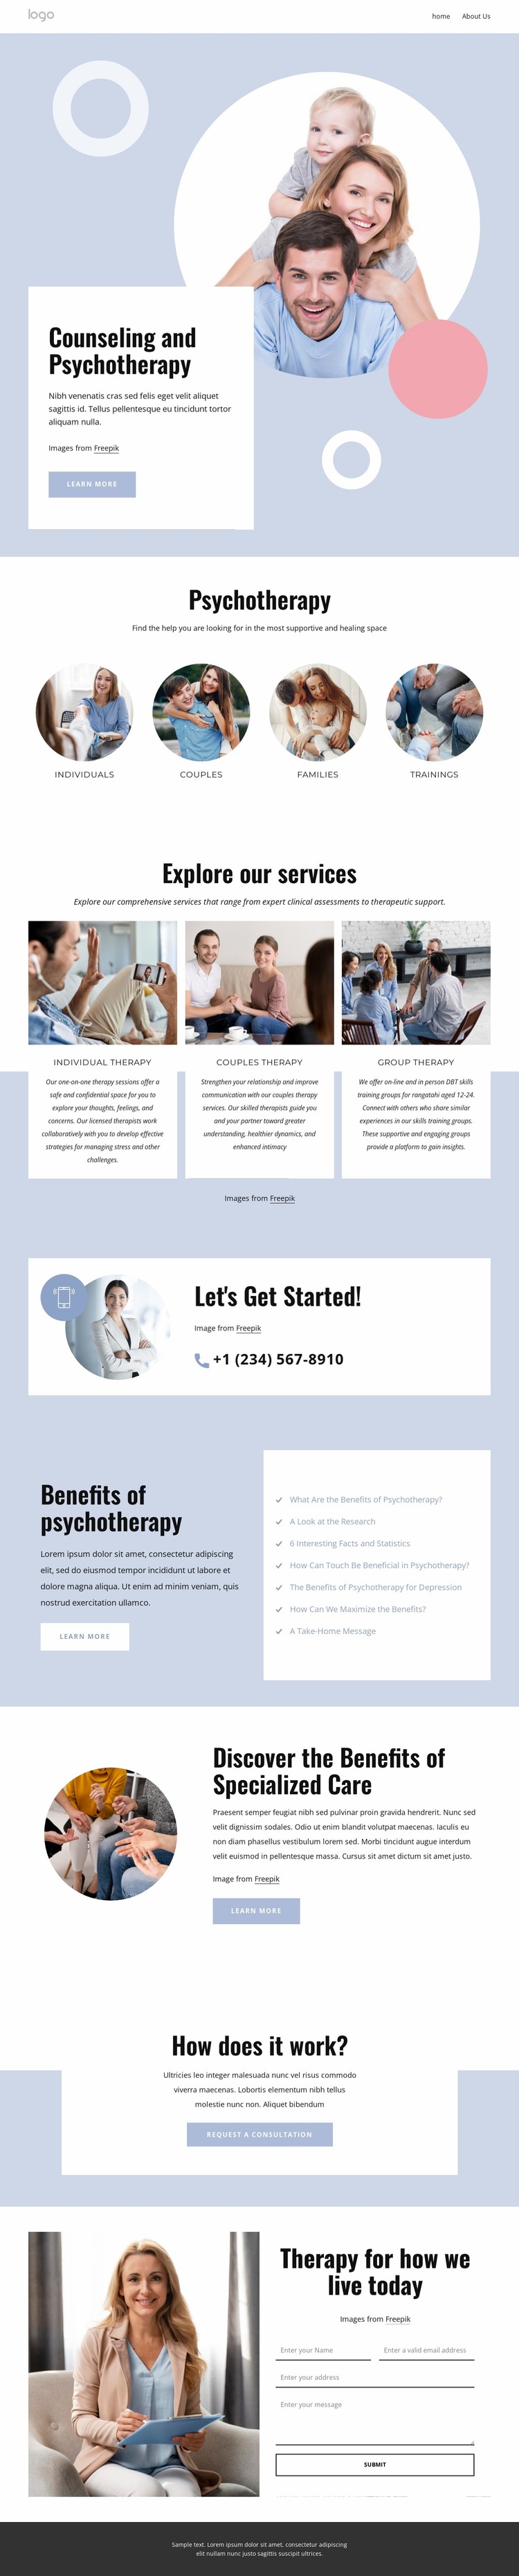 Counseling and psychotherapy Website Mockup